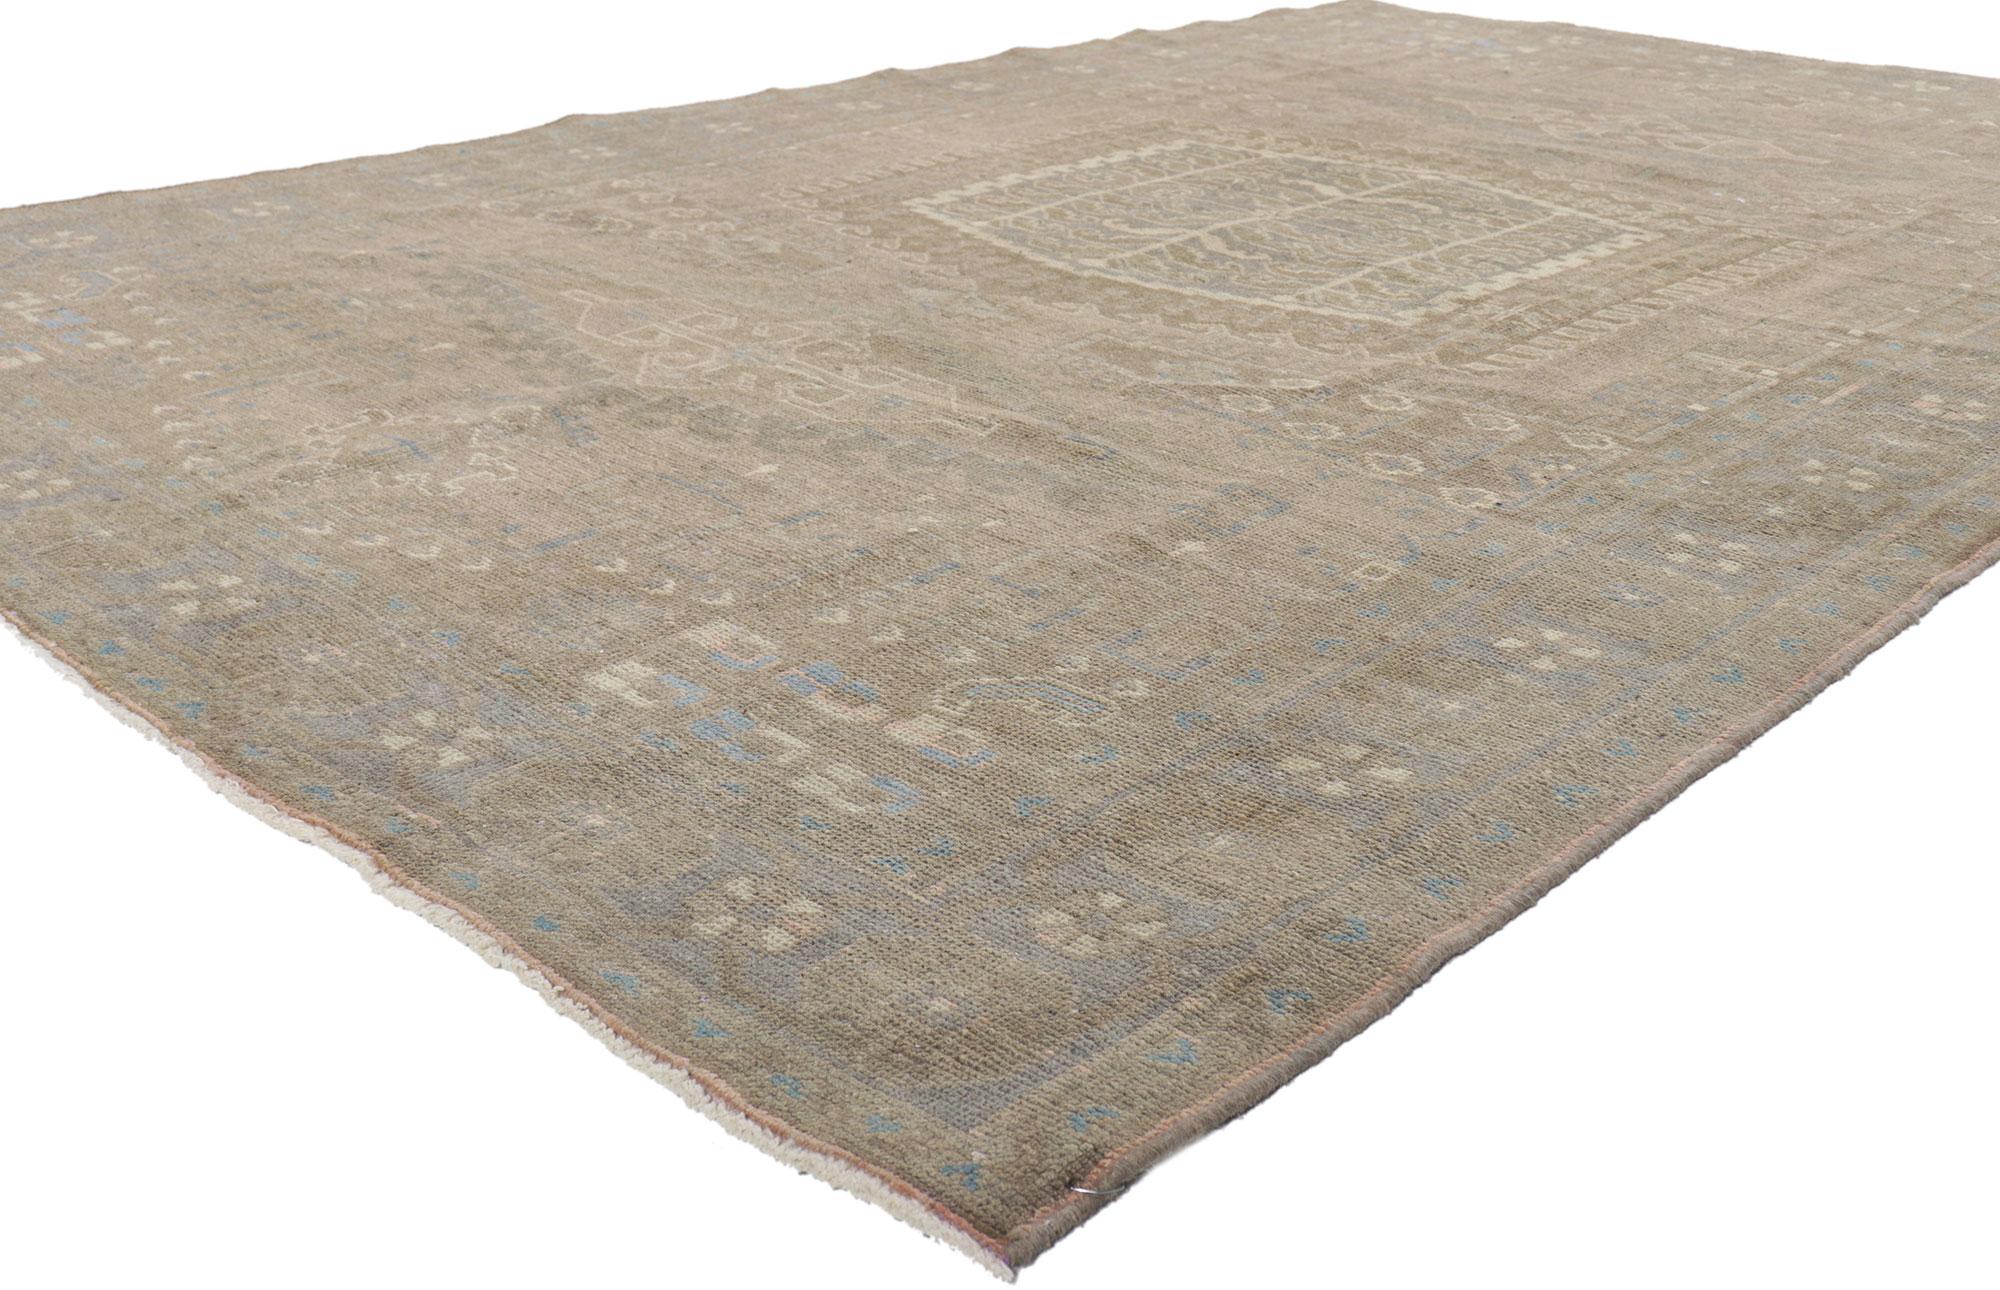 ?61189 vintage Persian Viss rug, 06'07 x 10'01.
Warm and inviting with incredible detail and texture, this hand knotted wool vintage Persian Viss rug is a captivating vision of woven beauty. The tribal design and tonal colorway woven into this